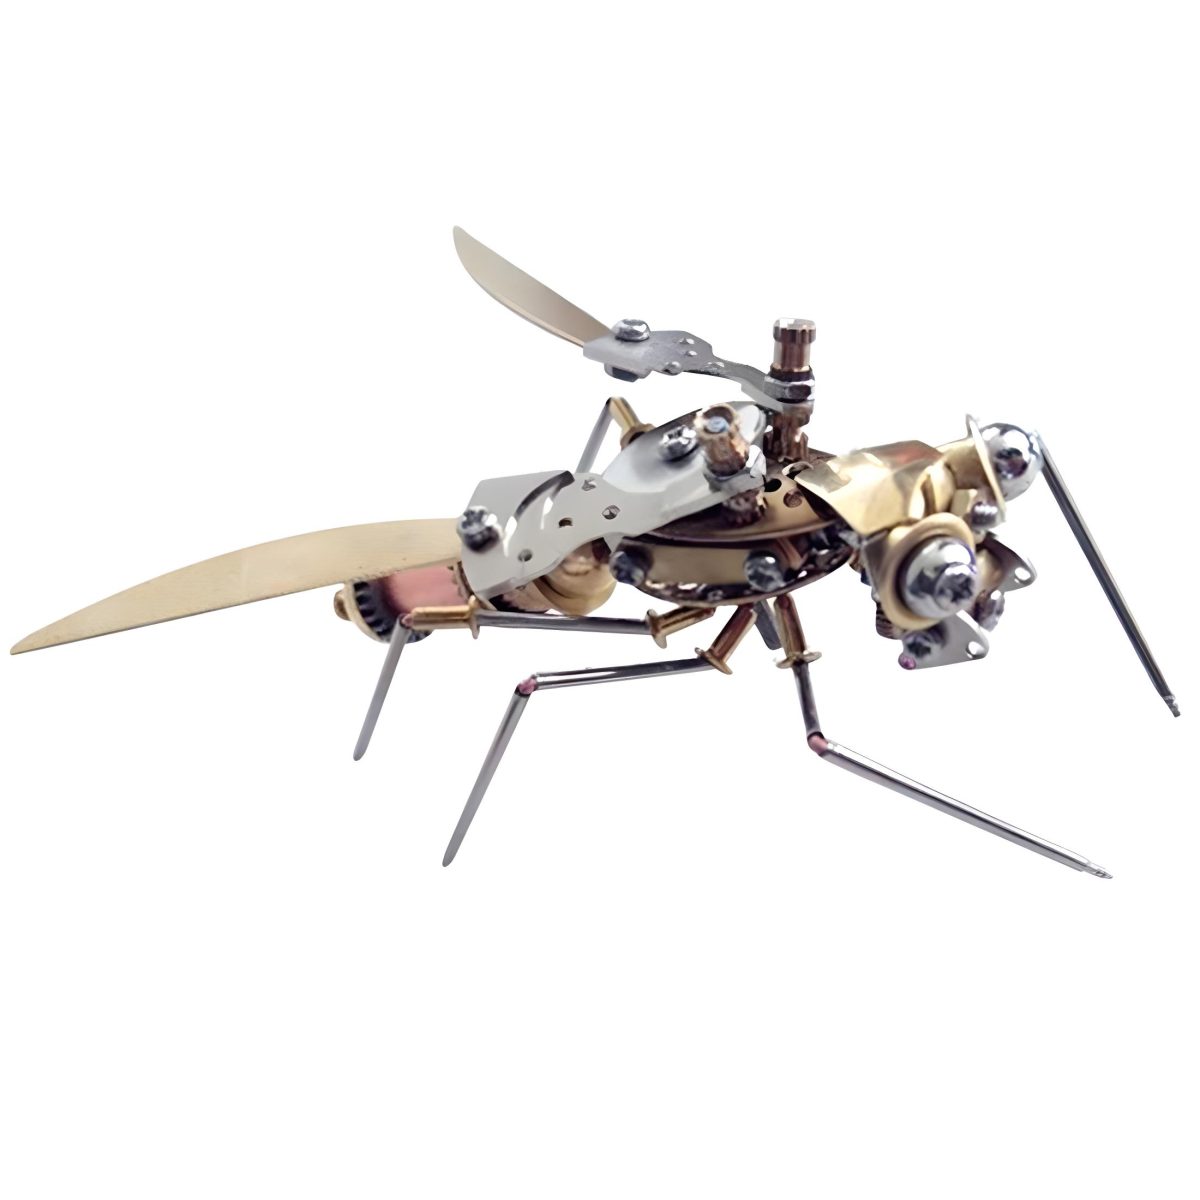 Steampunk Metal Mechanical Wasp Spider Insects Collection